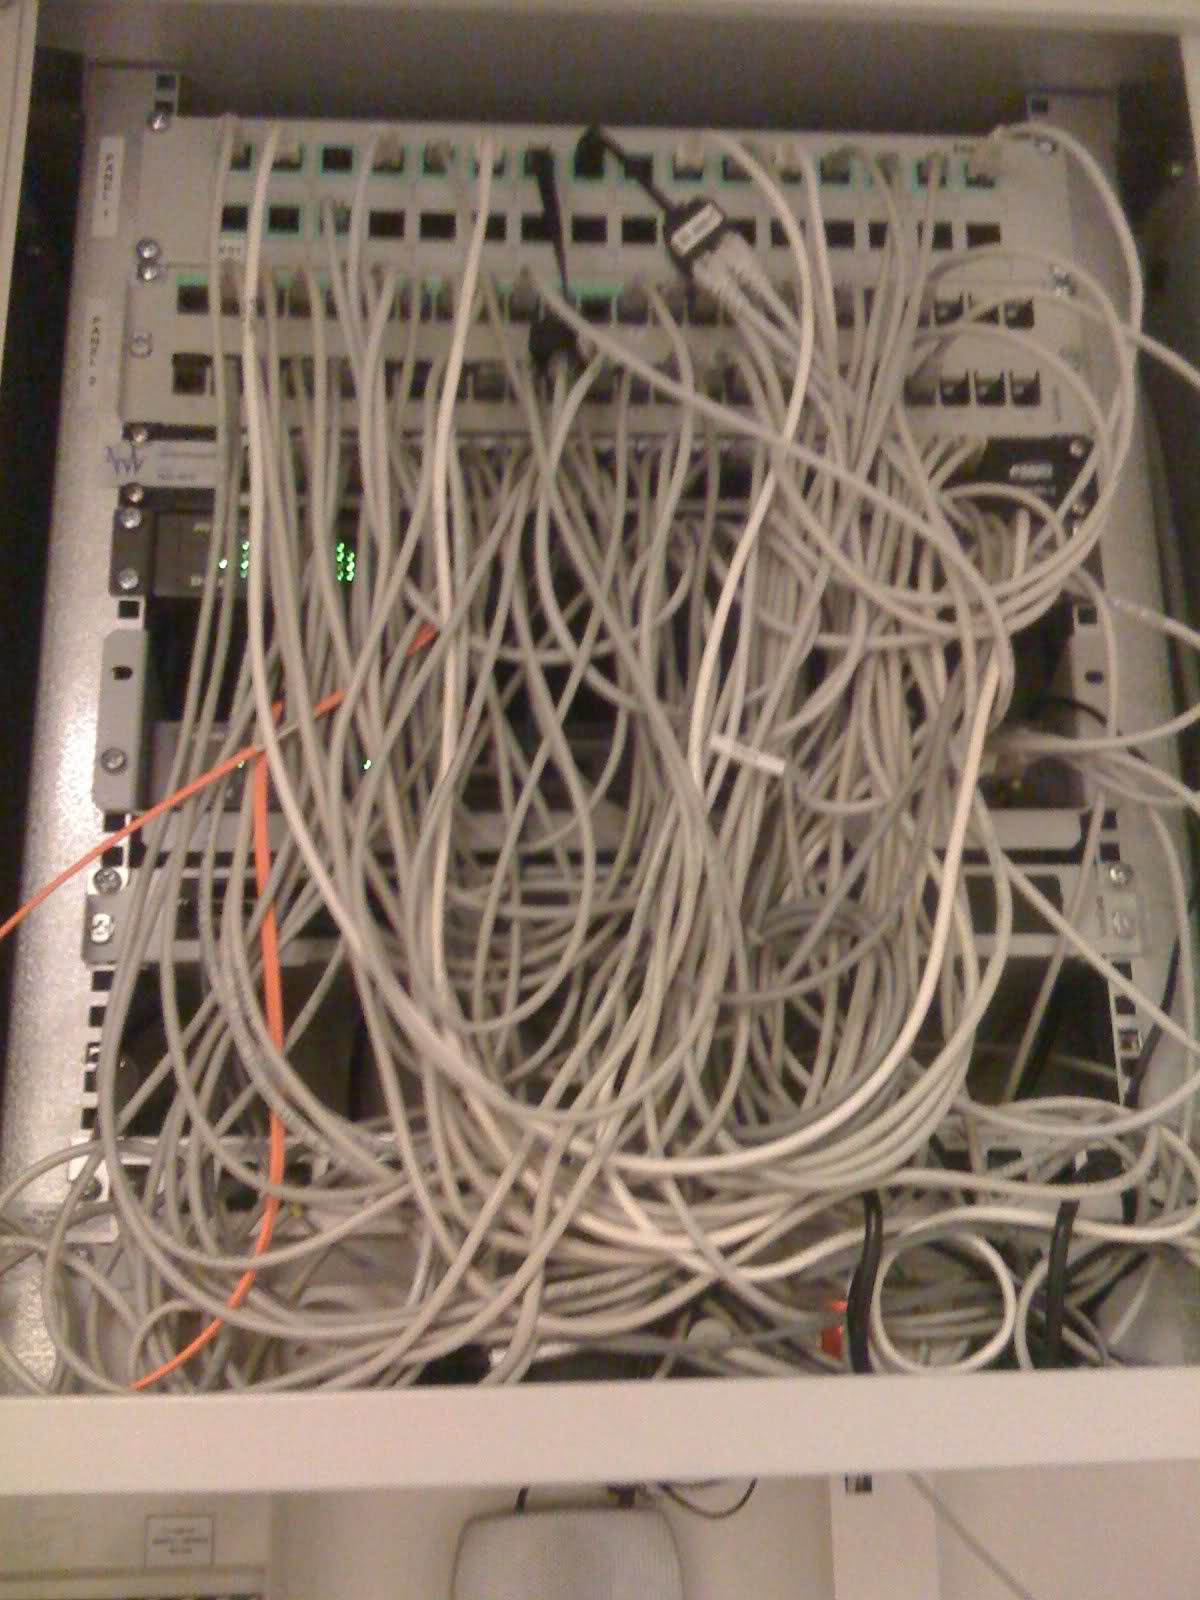 Server network cables photo